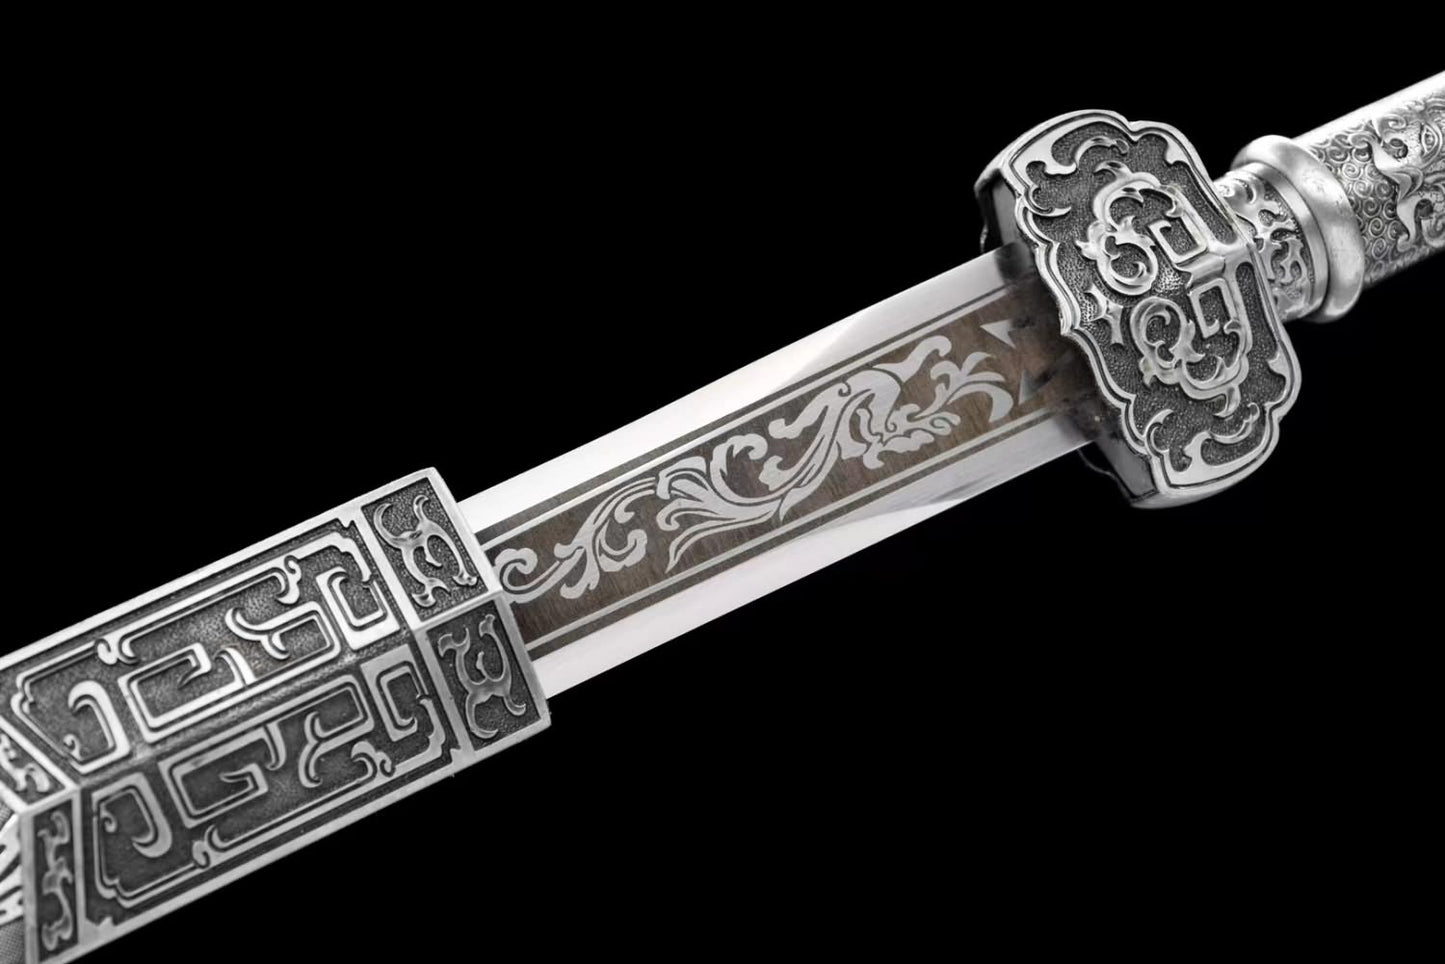 Ruyi jian Sword,Forged High Carbon Steel Etched Blade,Solid Wood Wrapped Faux Leather Scabbard,Alloy Fittings